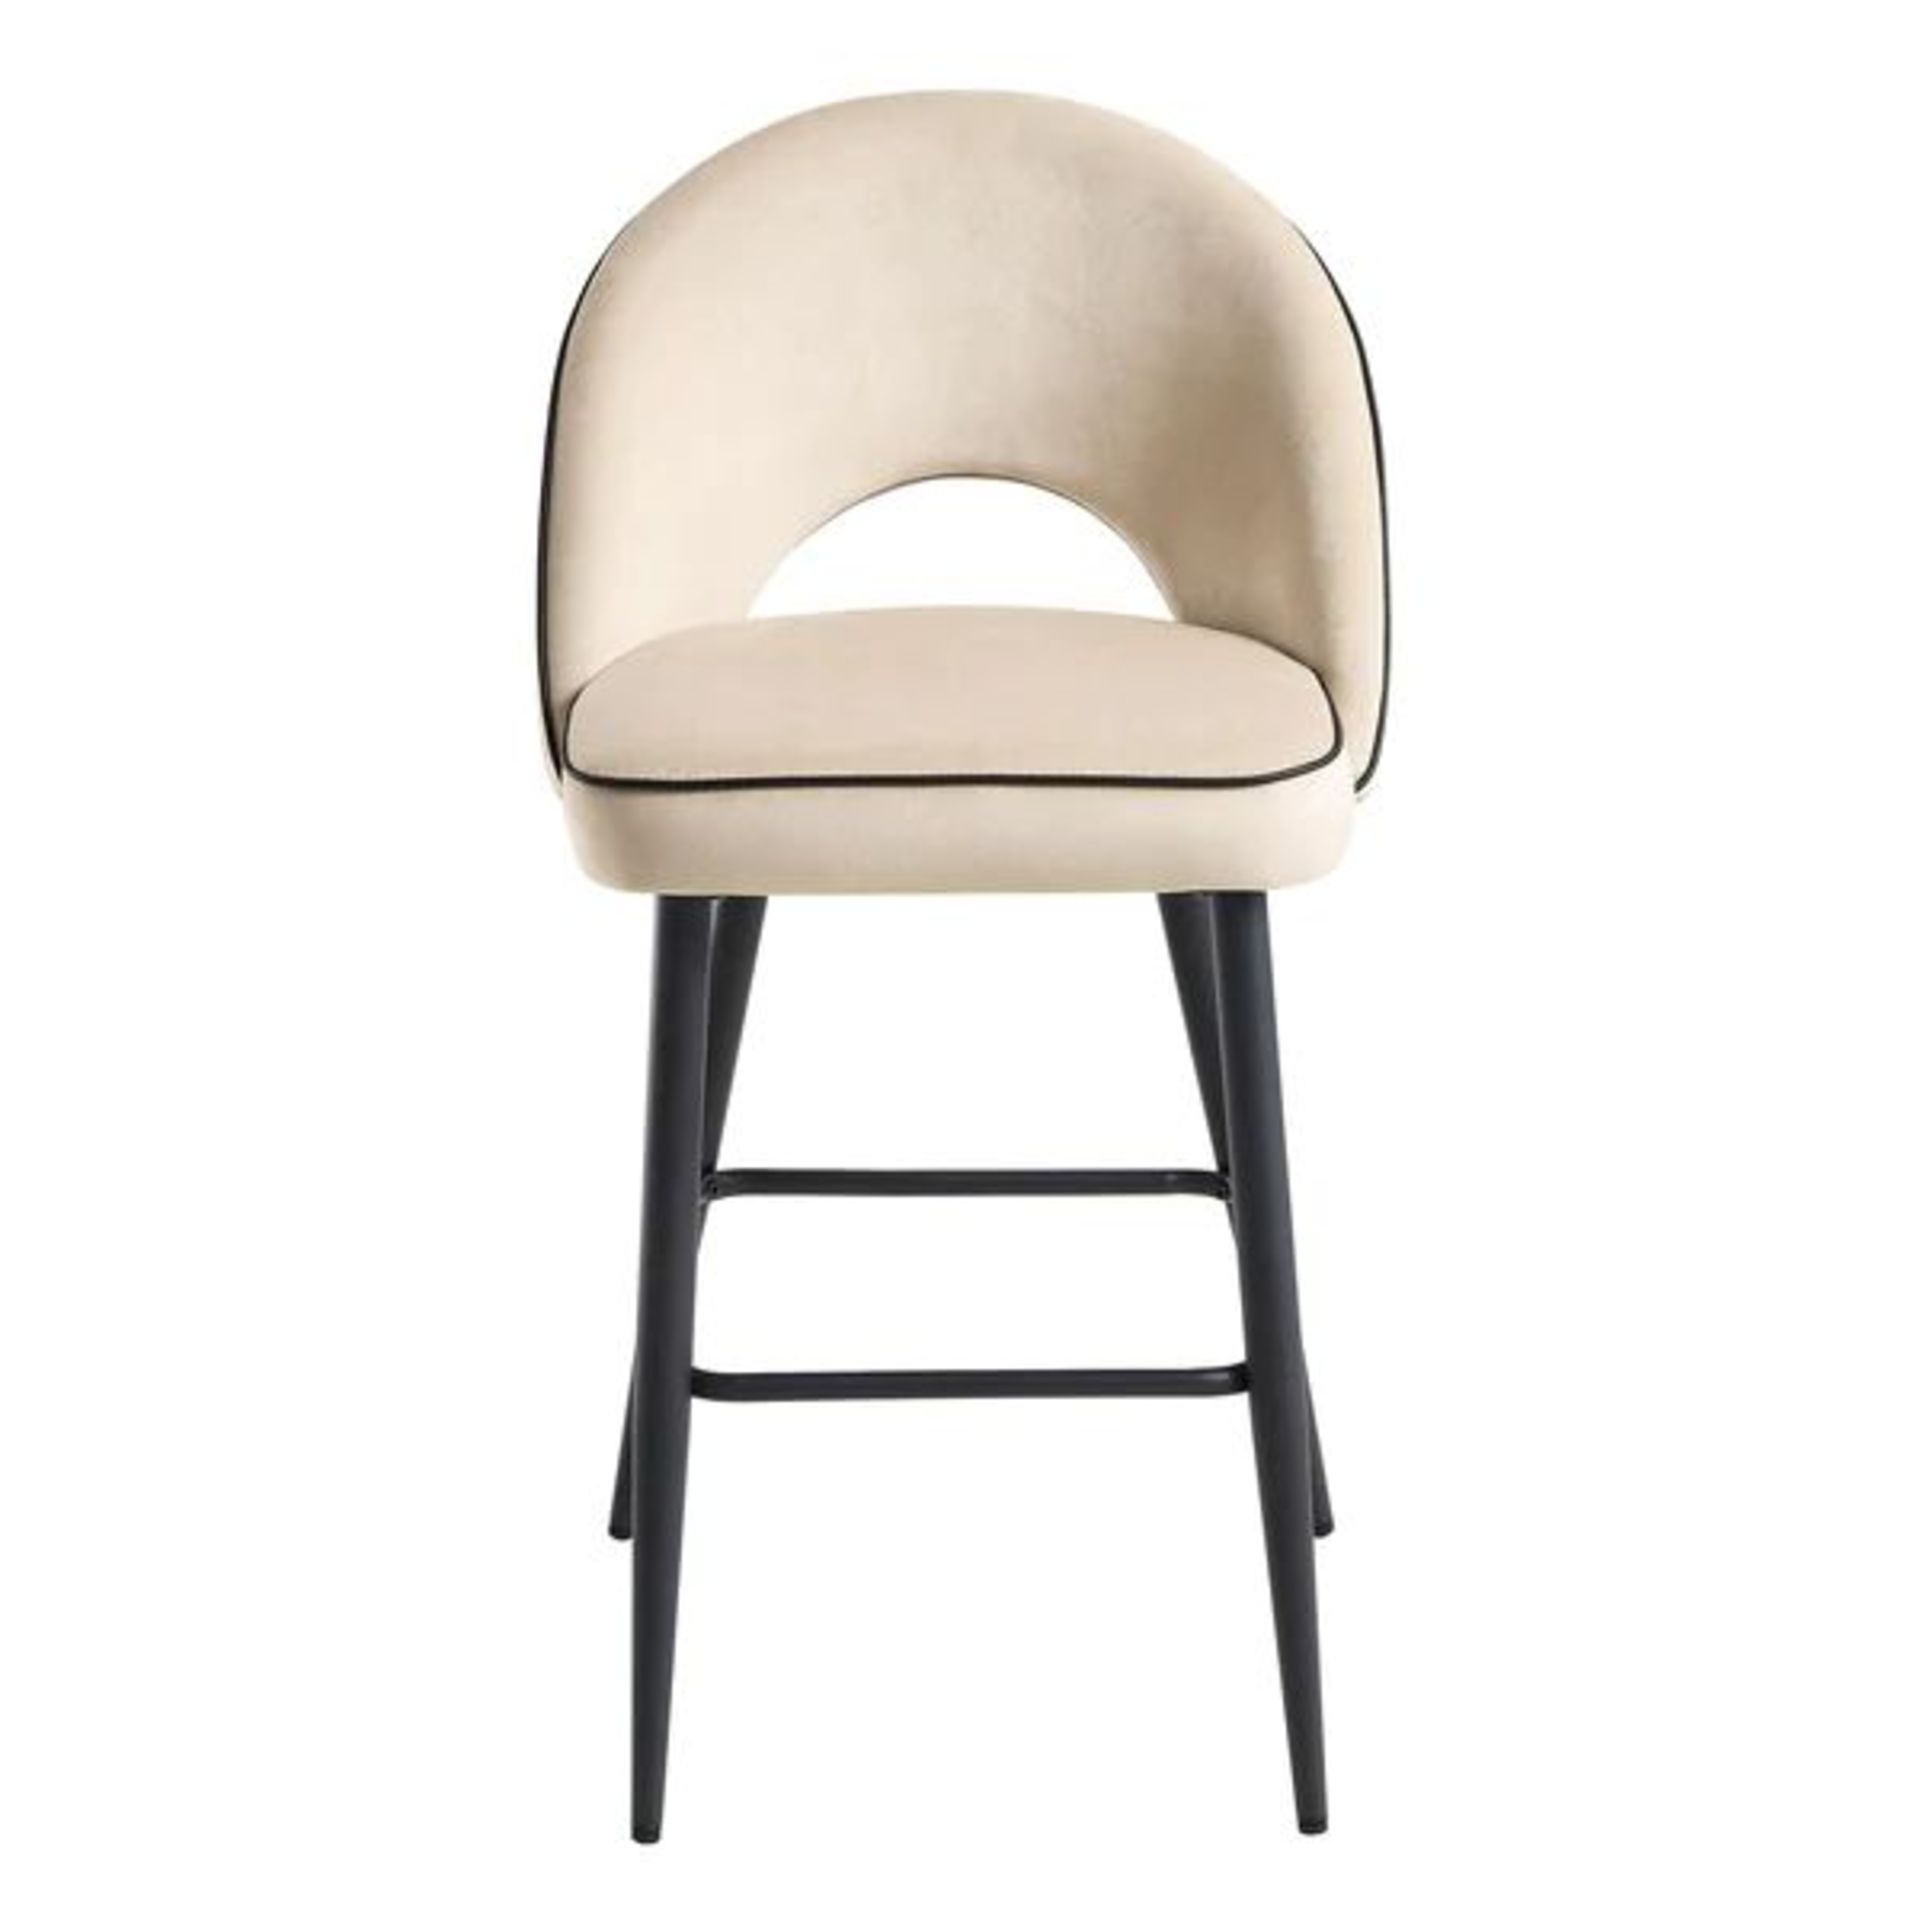 Oakley Set of 2 Champagne Velvet Upholstered Counter Stools with Contrast Piping. - ER29. RRP £239. - Image 2 of 2